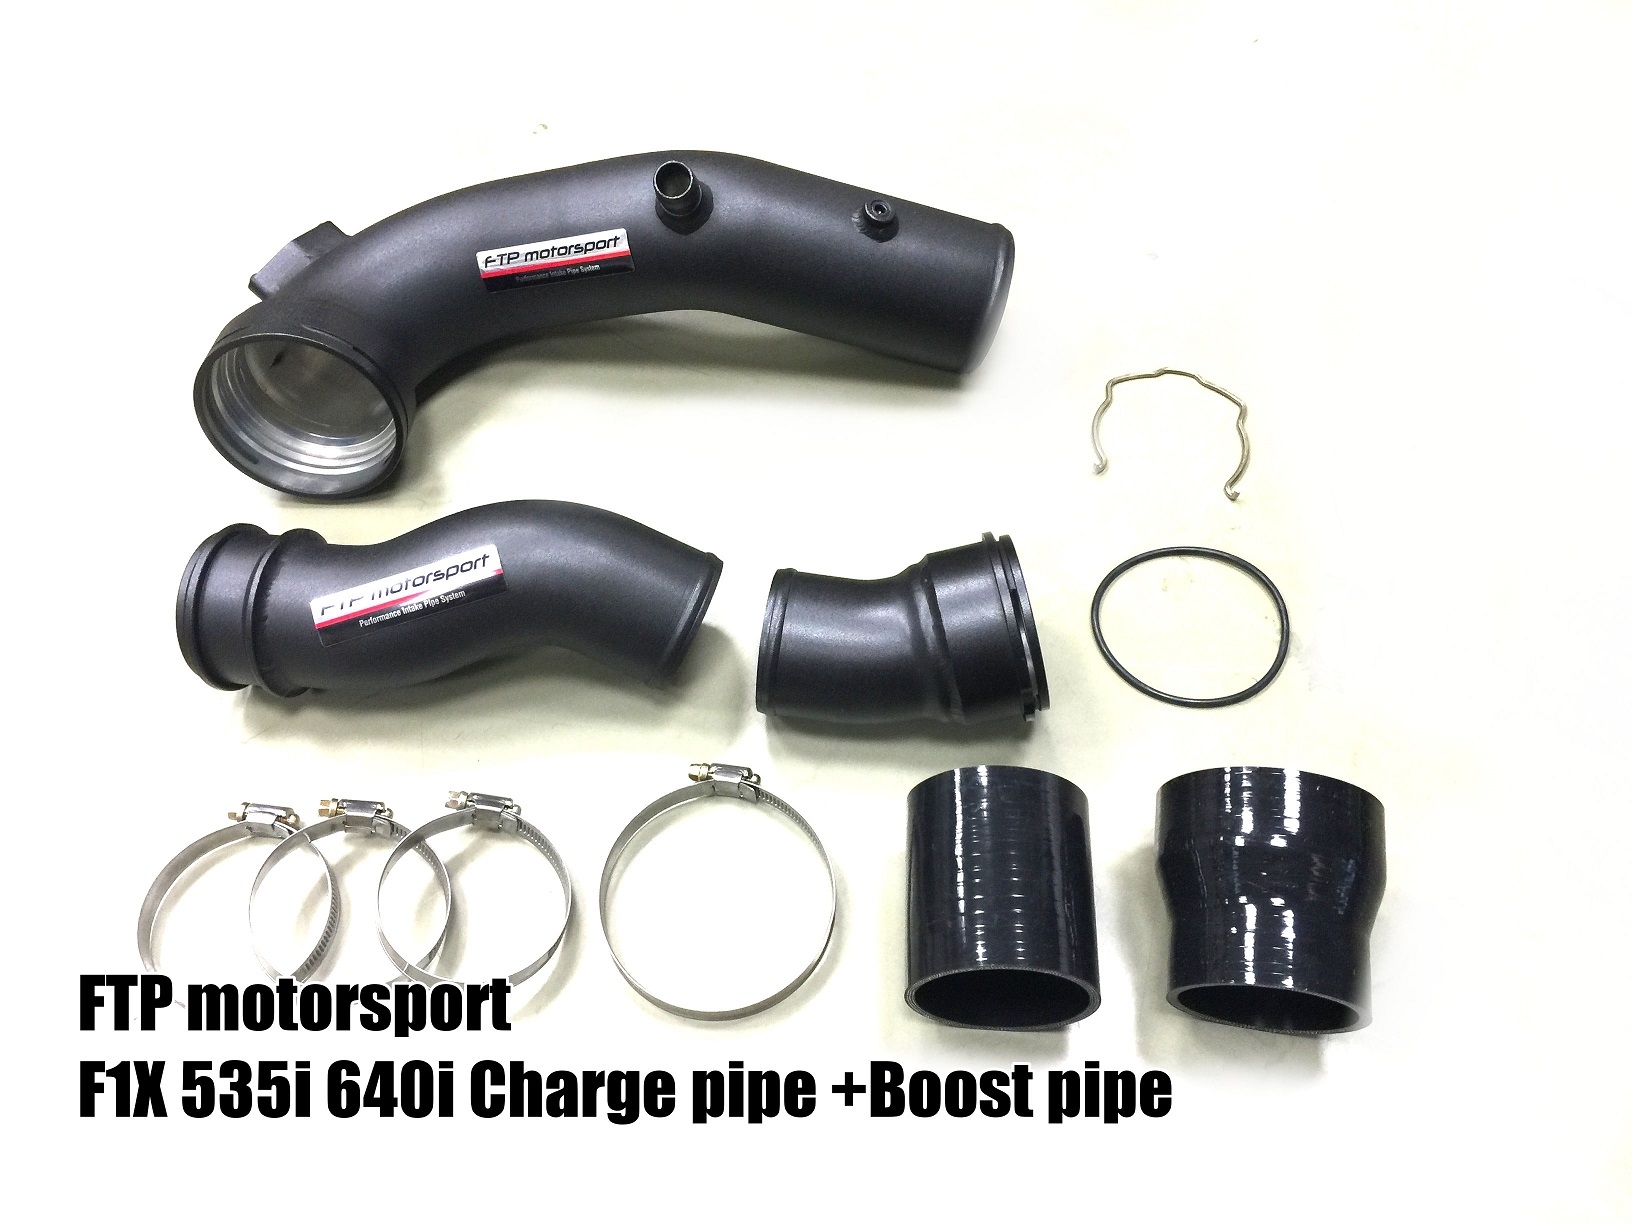 BMW F1X N55 charge pipe Combination packages